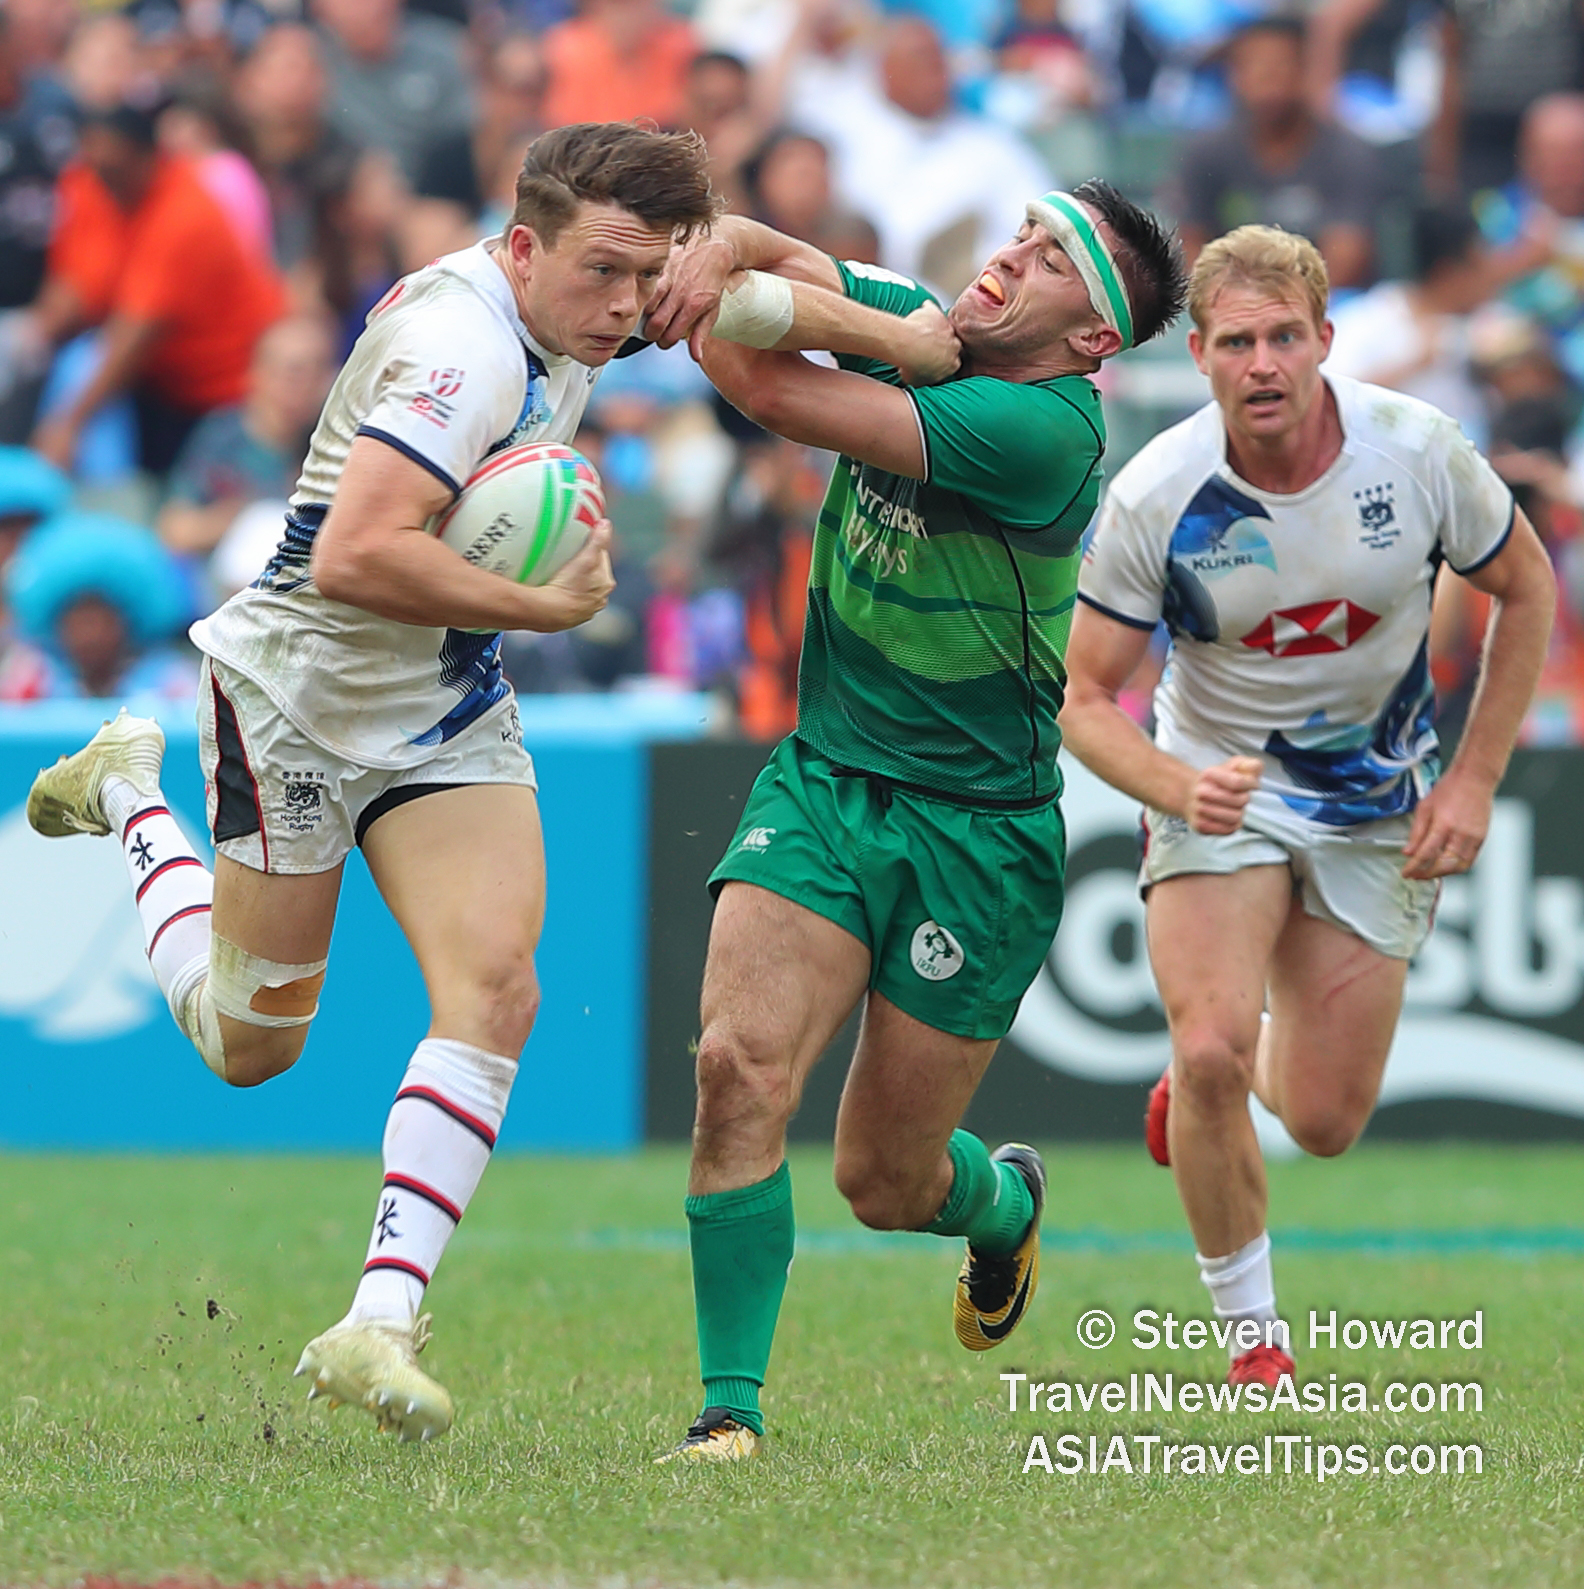 Ireland in action against Hong Kong at the Cathay Pacific / HSBC Hong Kong Sevens 2019. The HK7s are the perfect example of the power of sport tourism as not only has it been Asia's most successful annual sporting event for decades, it has had a massive impact on the growth of rugby sevens around the world and encouraged more people in the region, and elsewhere, to play sport and live a healthier lifestyle. It is also a massive corporate networking event. Picture by Steven Howard of TravelNewsAsia.com Click to enlarge.